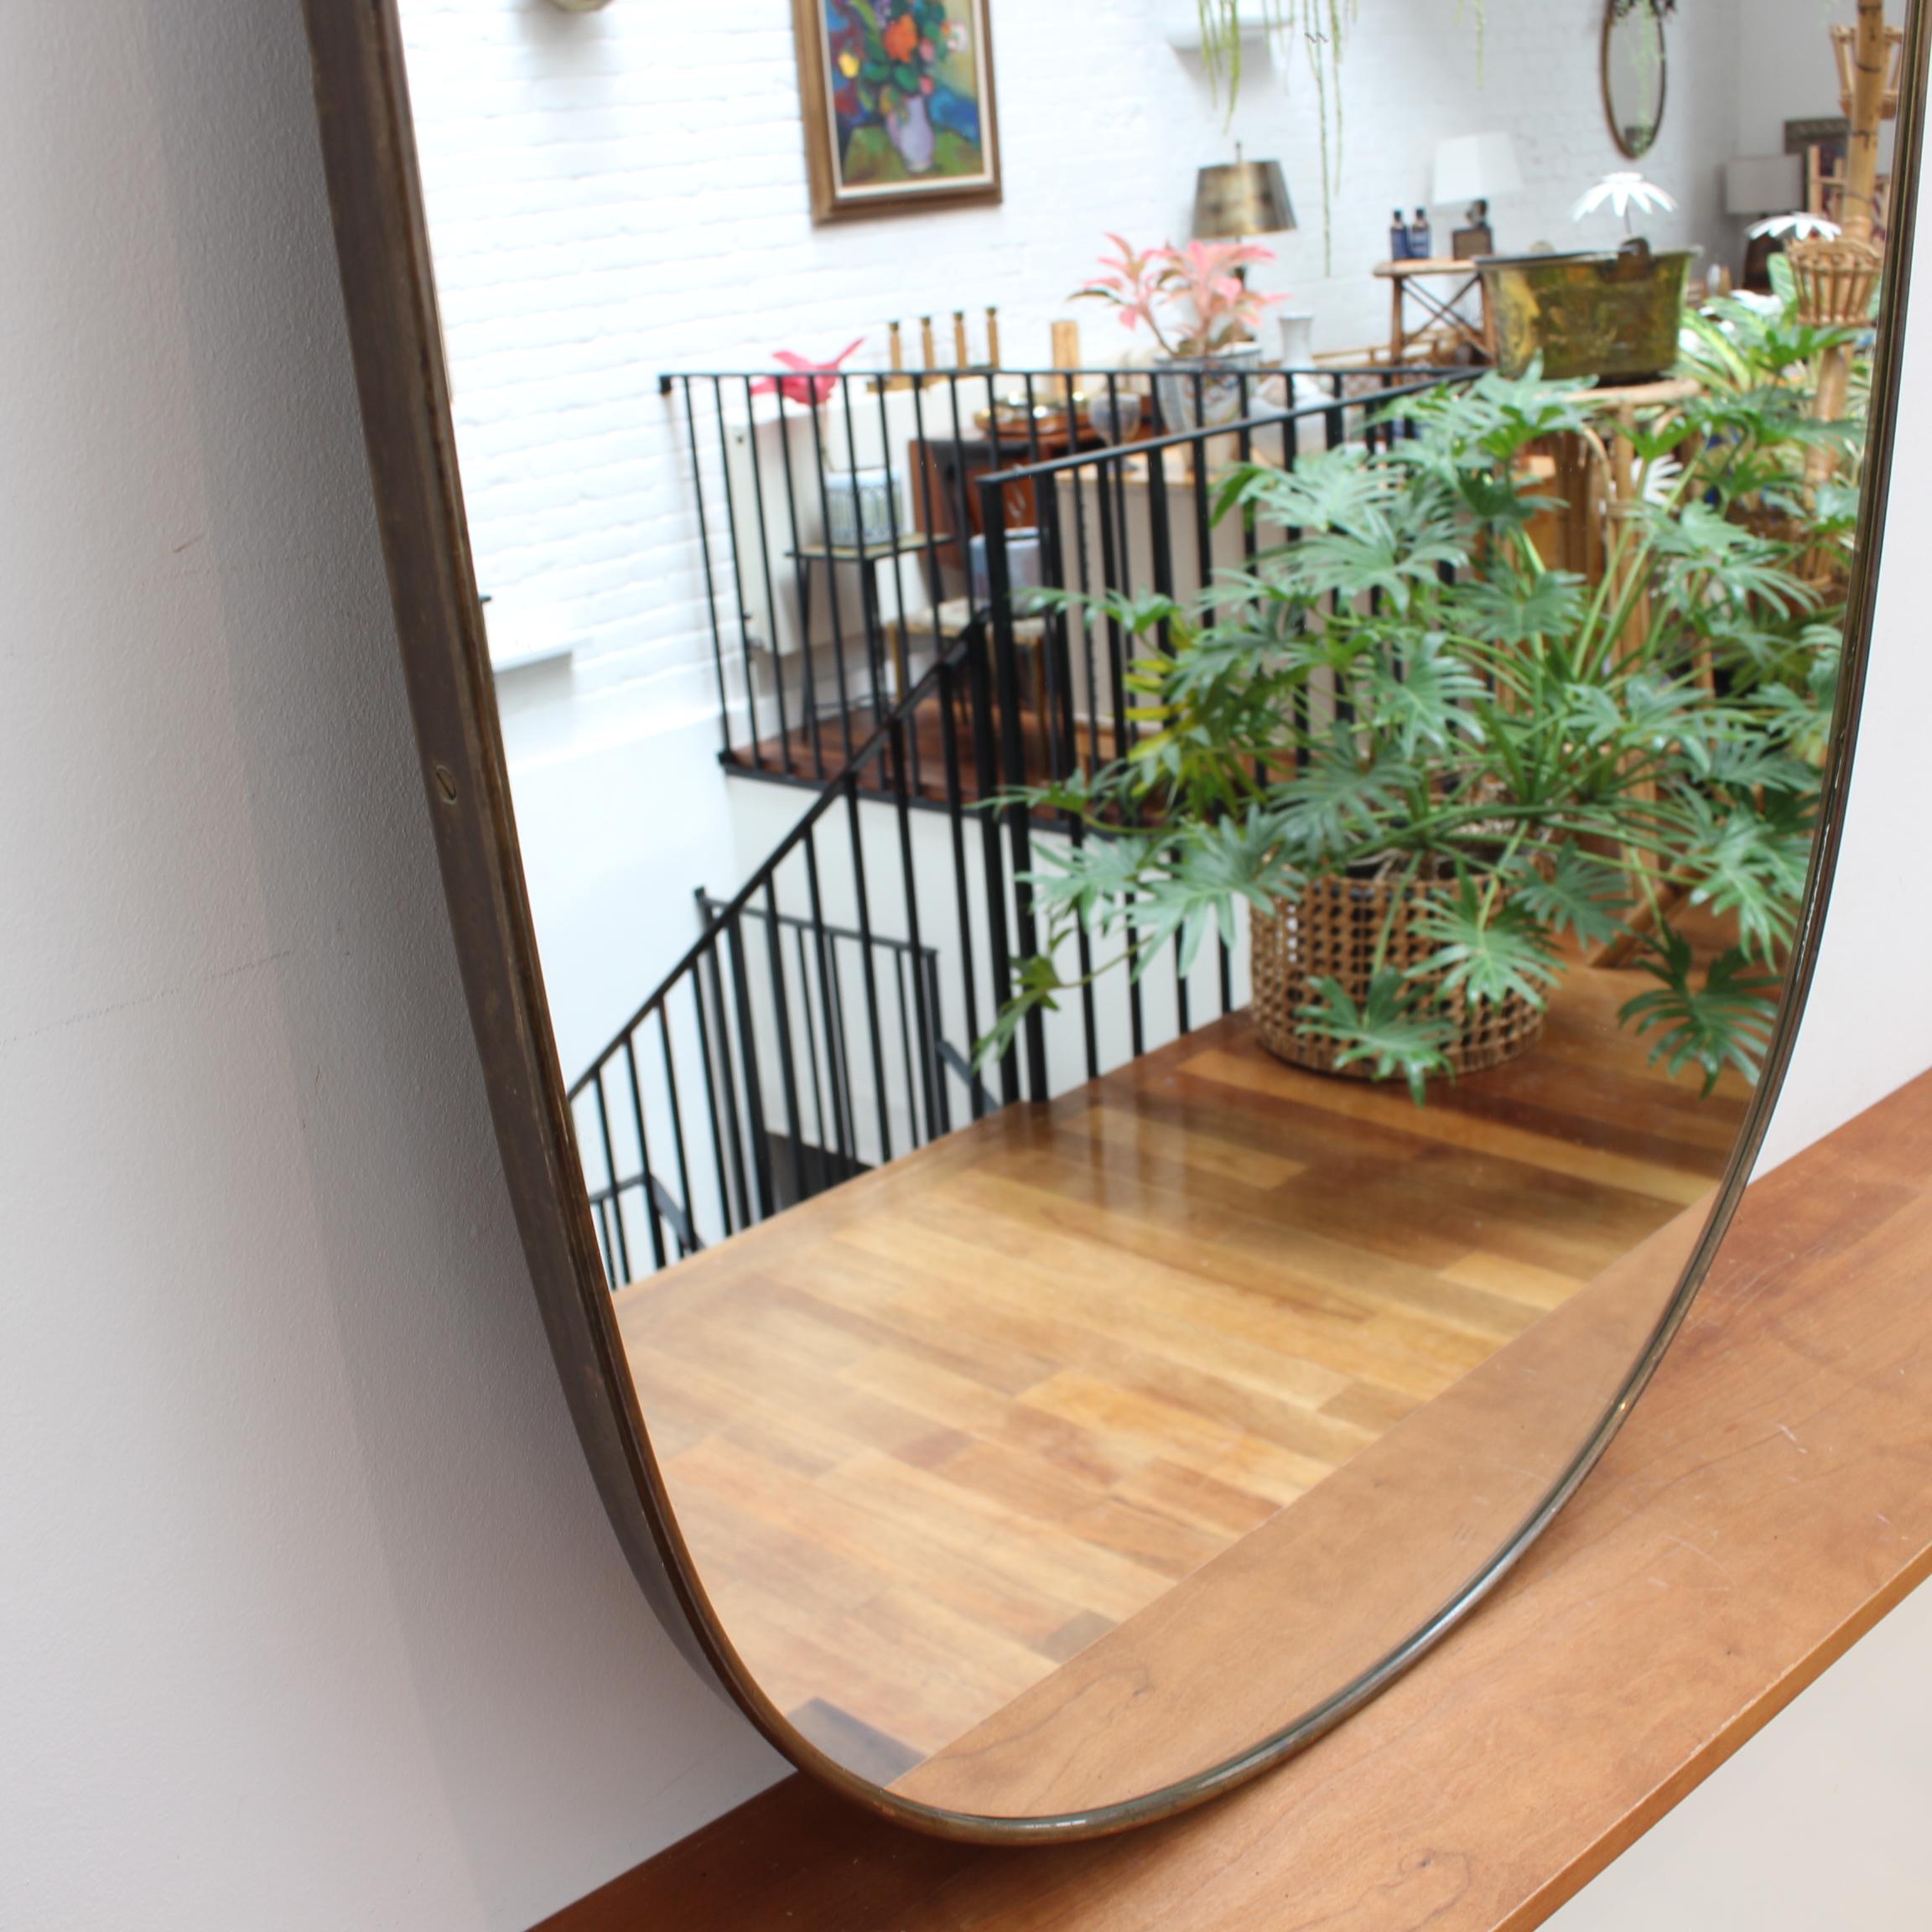 Vintage Italian Wall Mirror with Brass Frame (circa 1960s) - Large For Sale 3